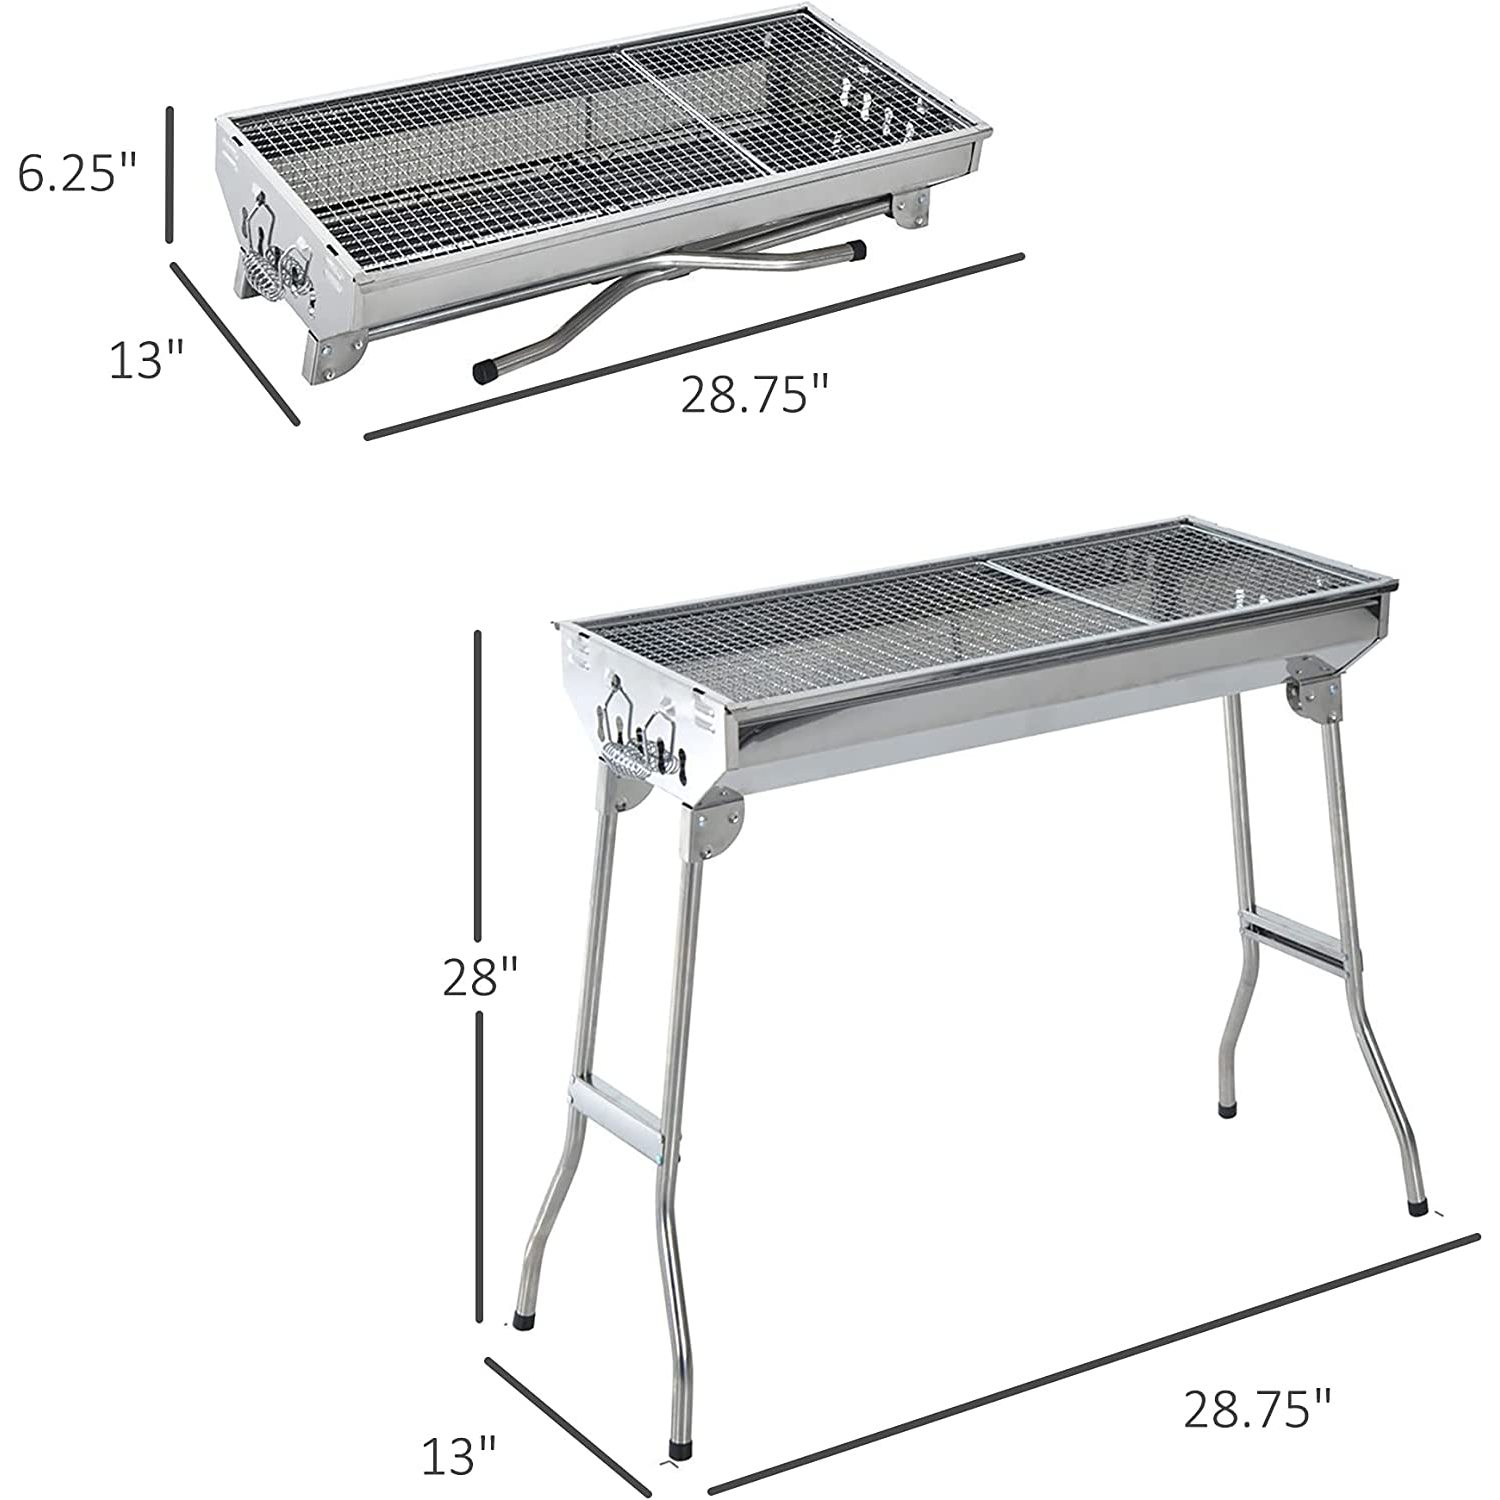 Bilot 28" Stainless Steel Small Portable Folding Charcoal BBQ Grill Set - image 3 of 8